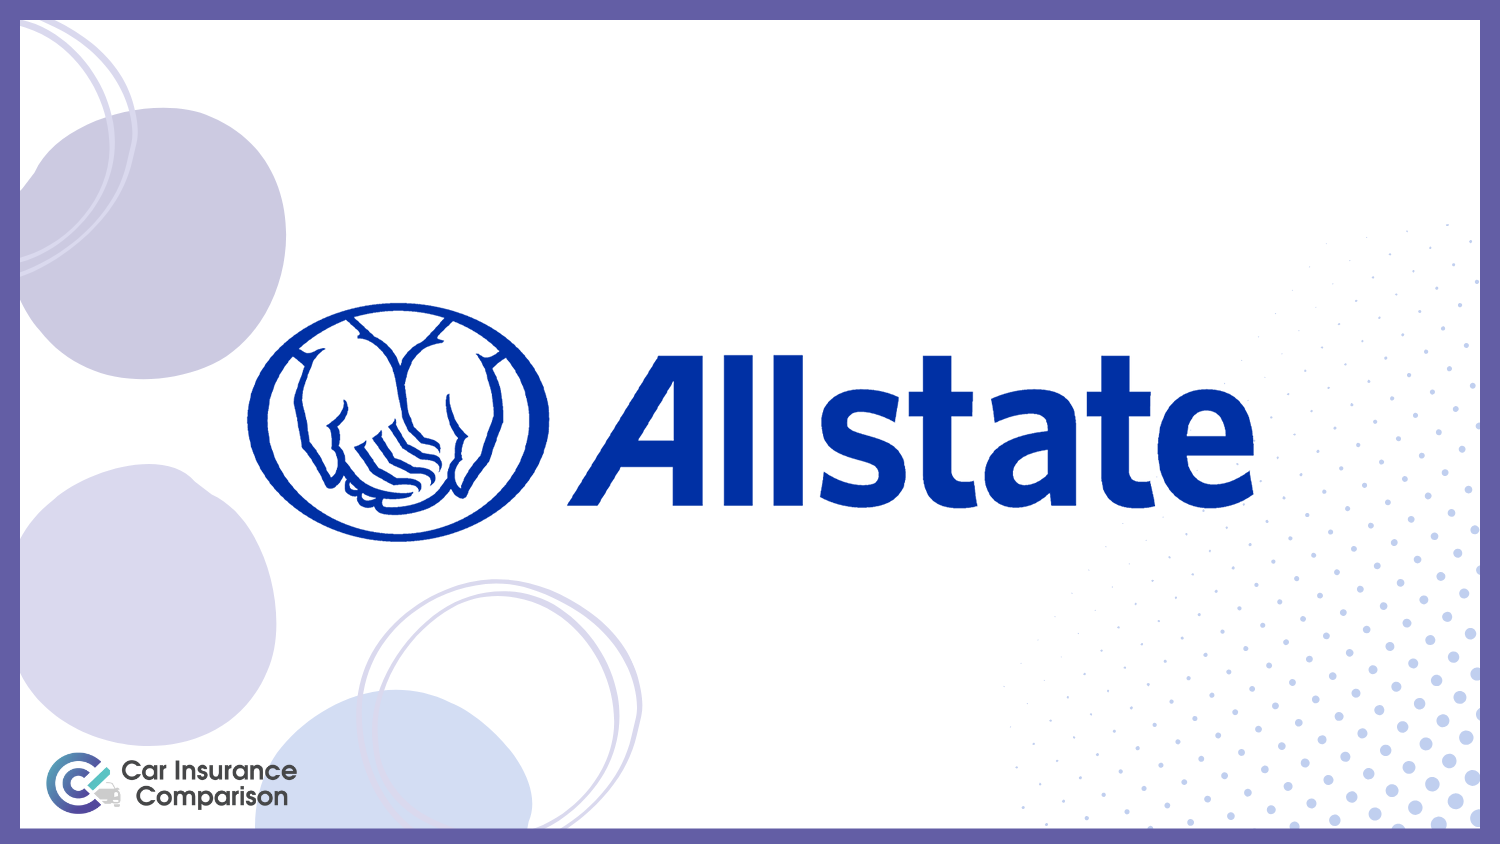 Allstate: Best Car Insurance for Undocumented Immigrants